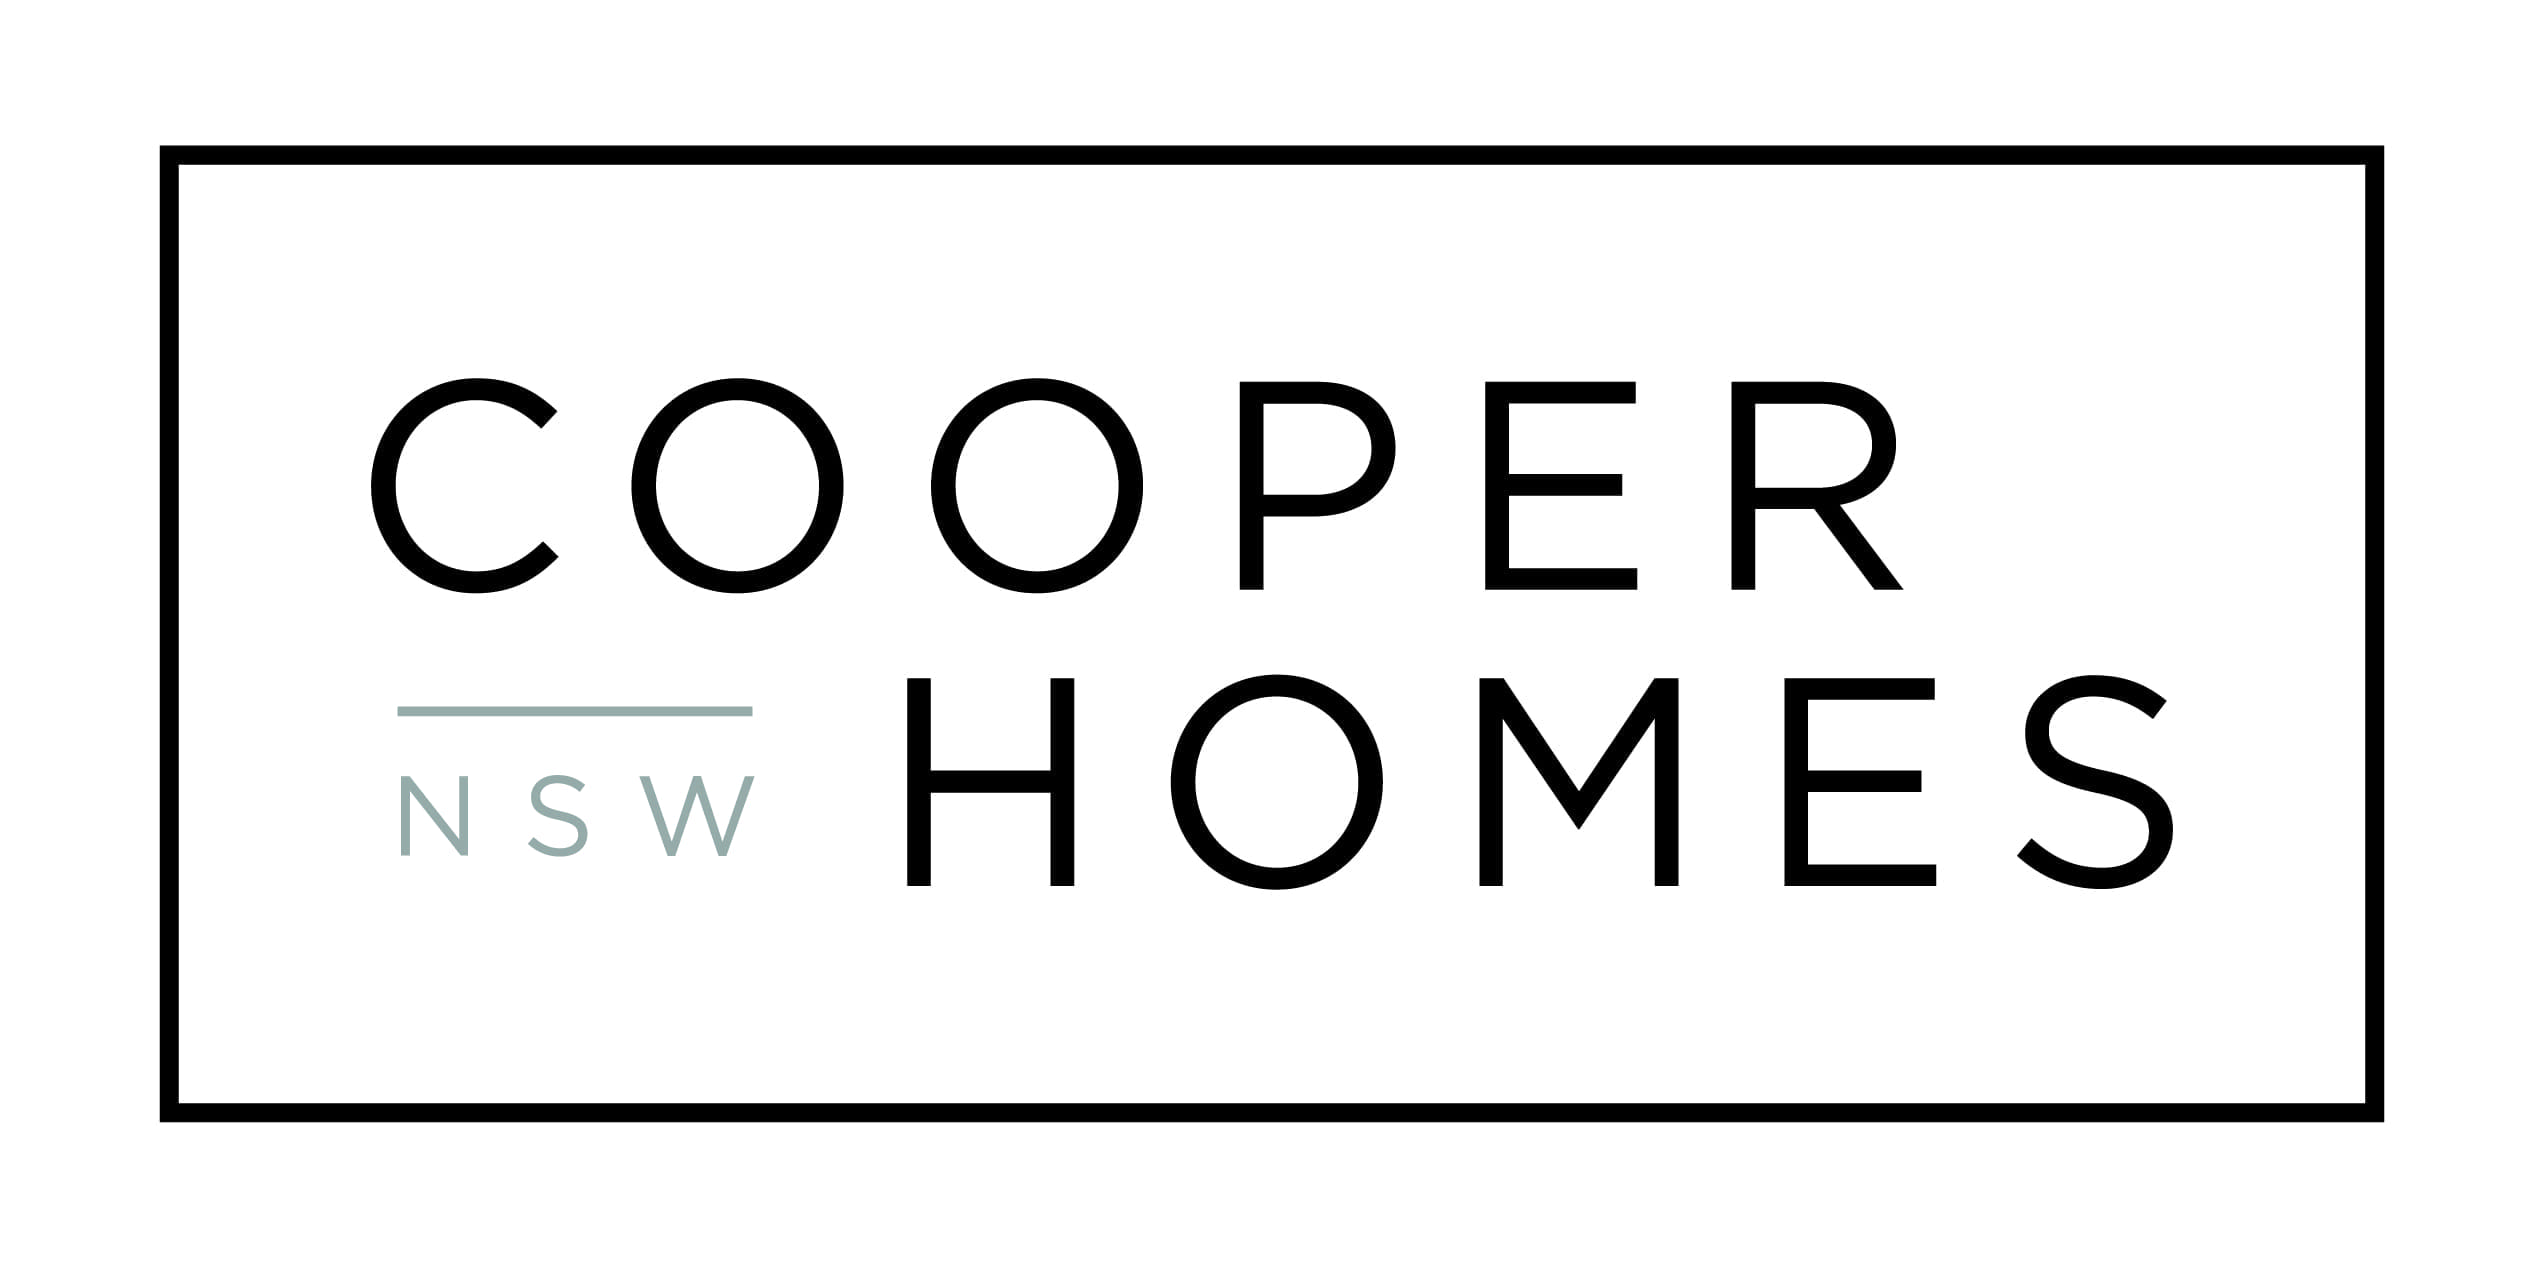 Cooper Homes NSW